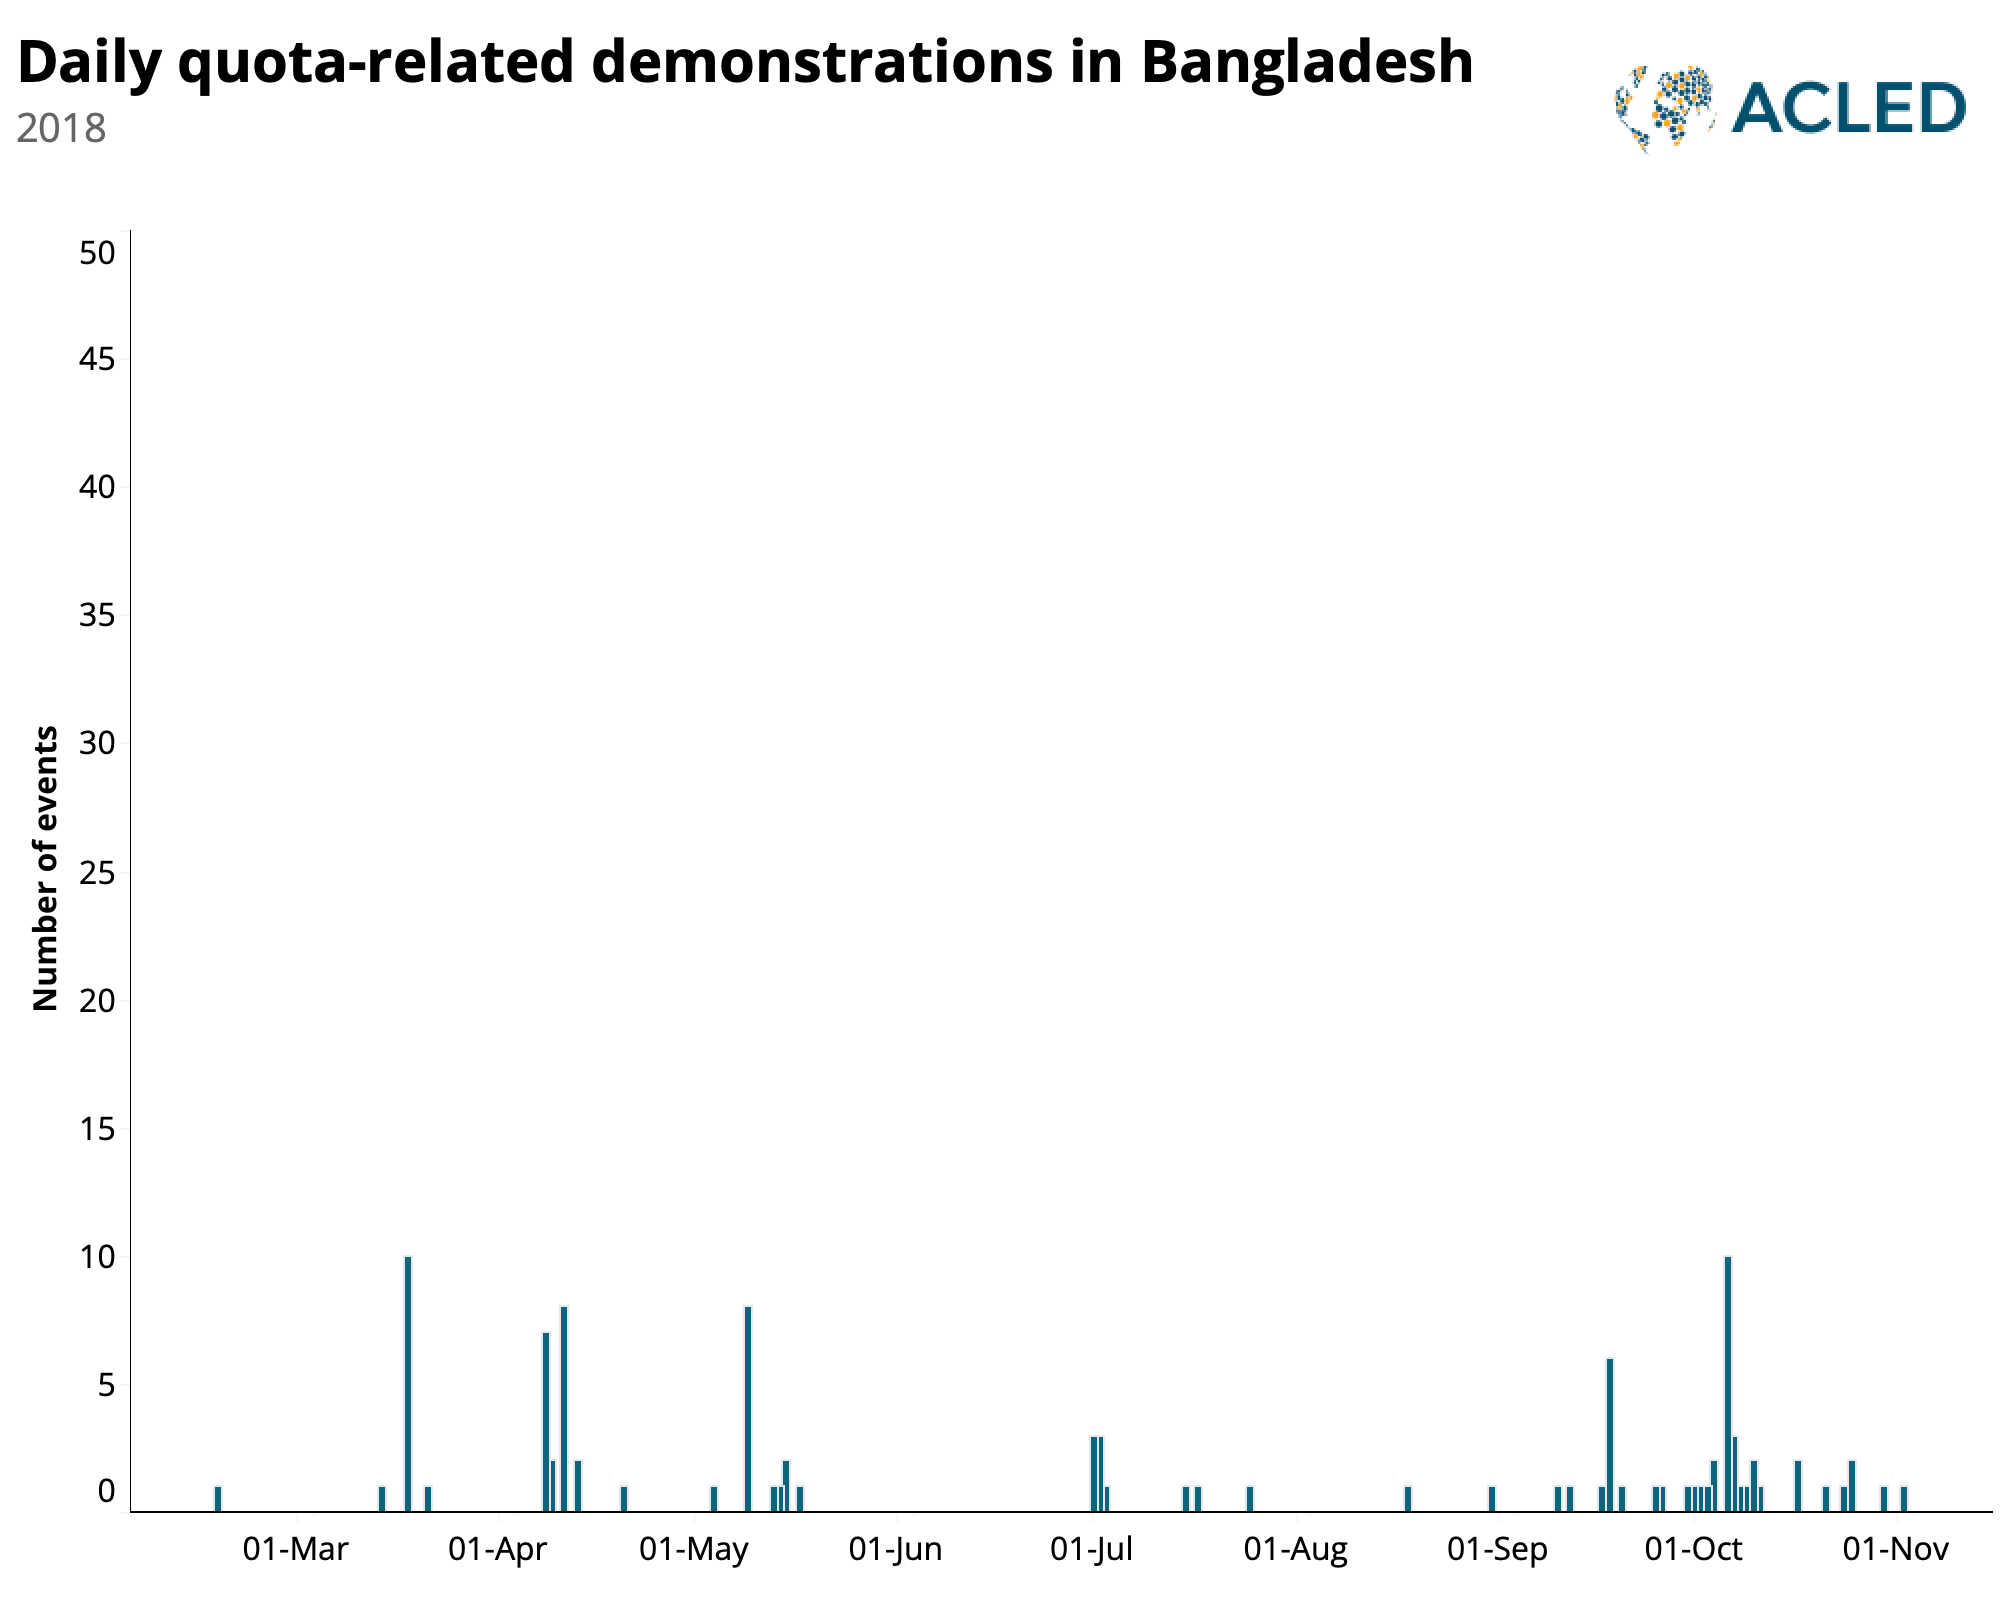 Chart showing daily quote related demonstrations in bangladesh, March to November 2018